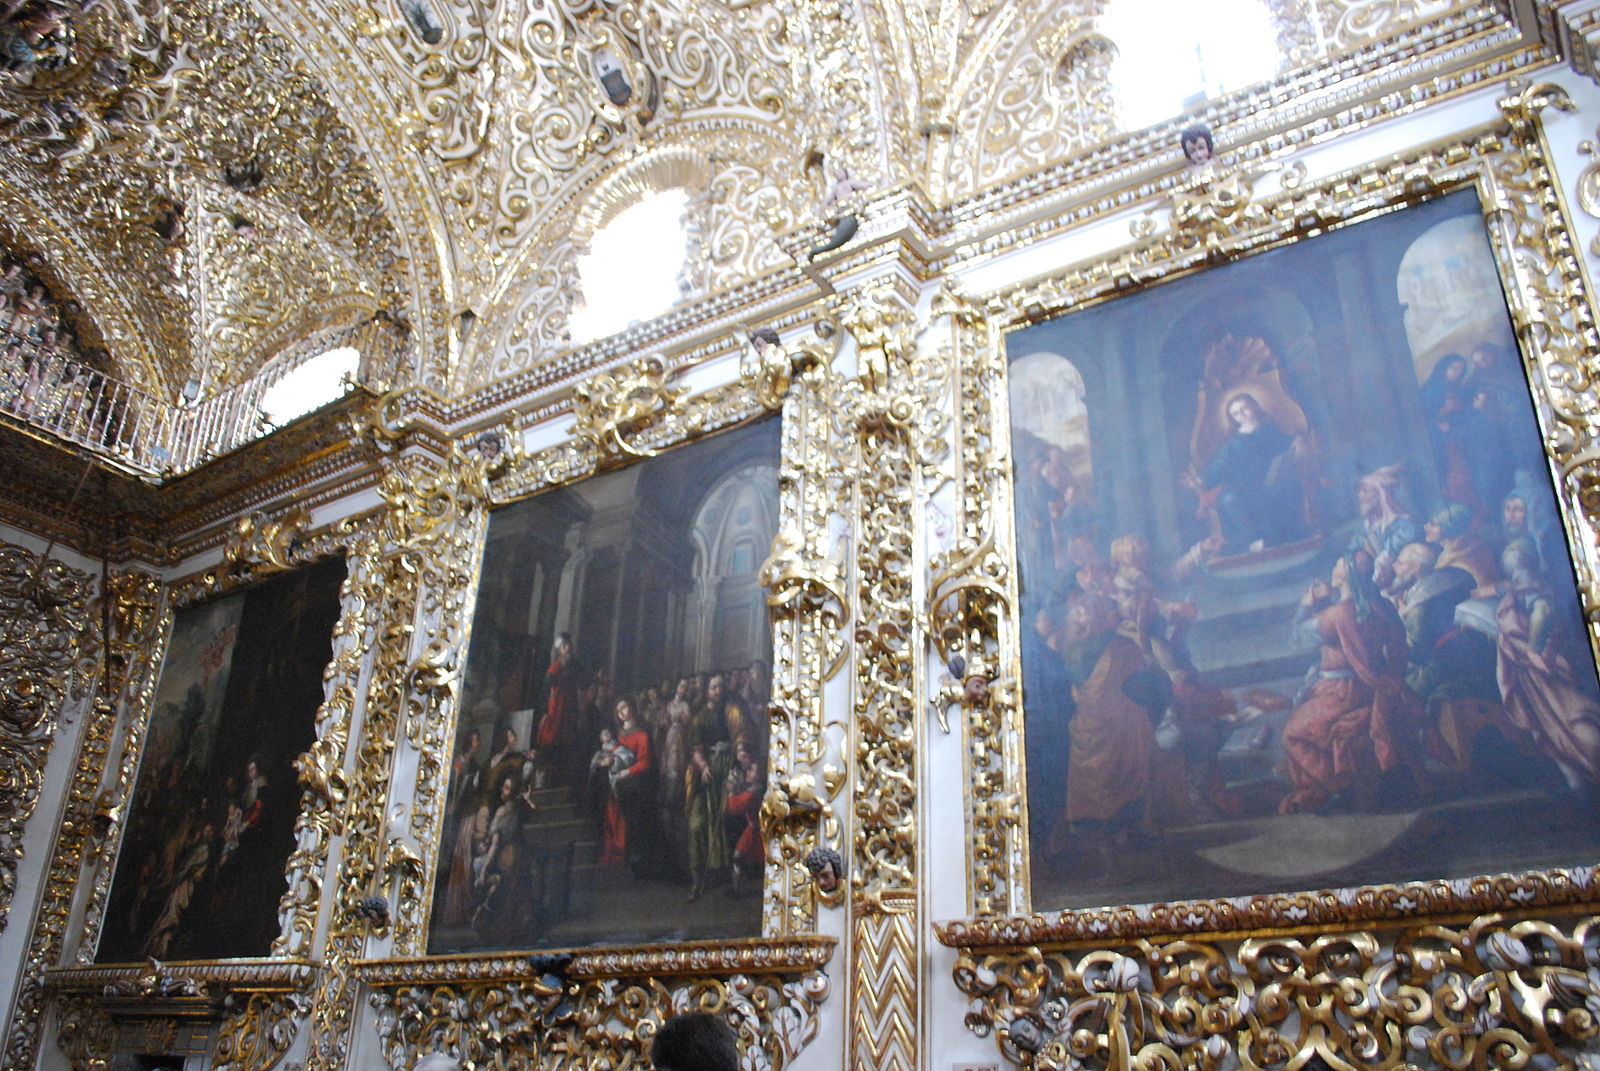 Wall in a church with ornate scroll work and paintings hanging on the wall